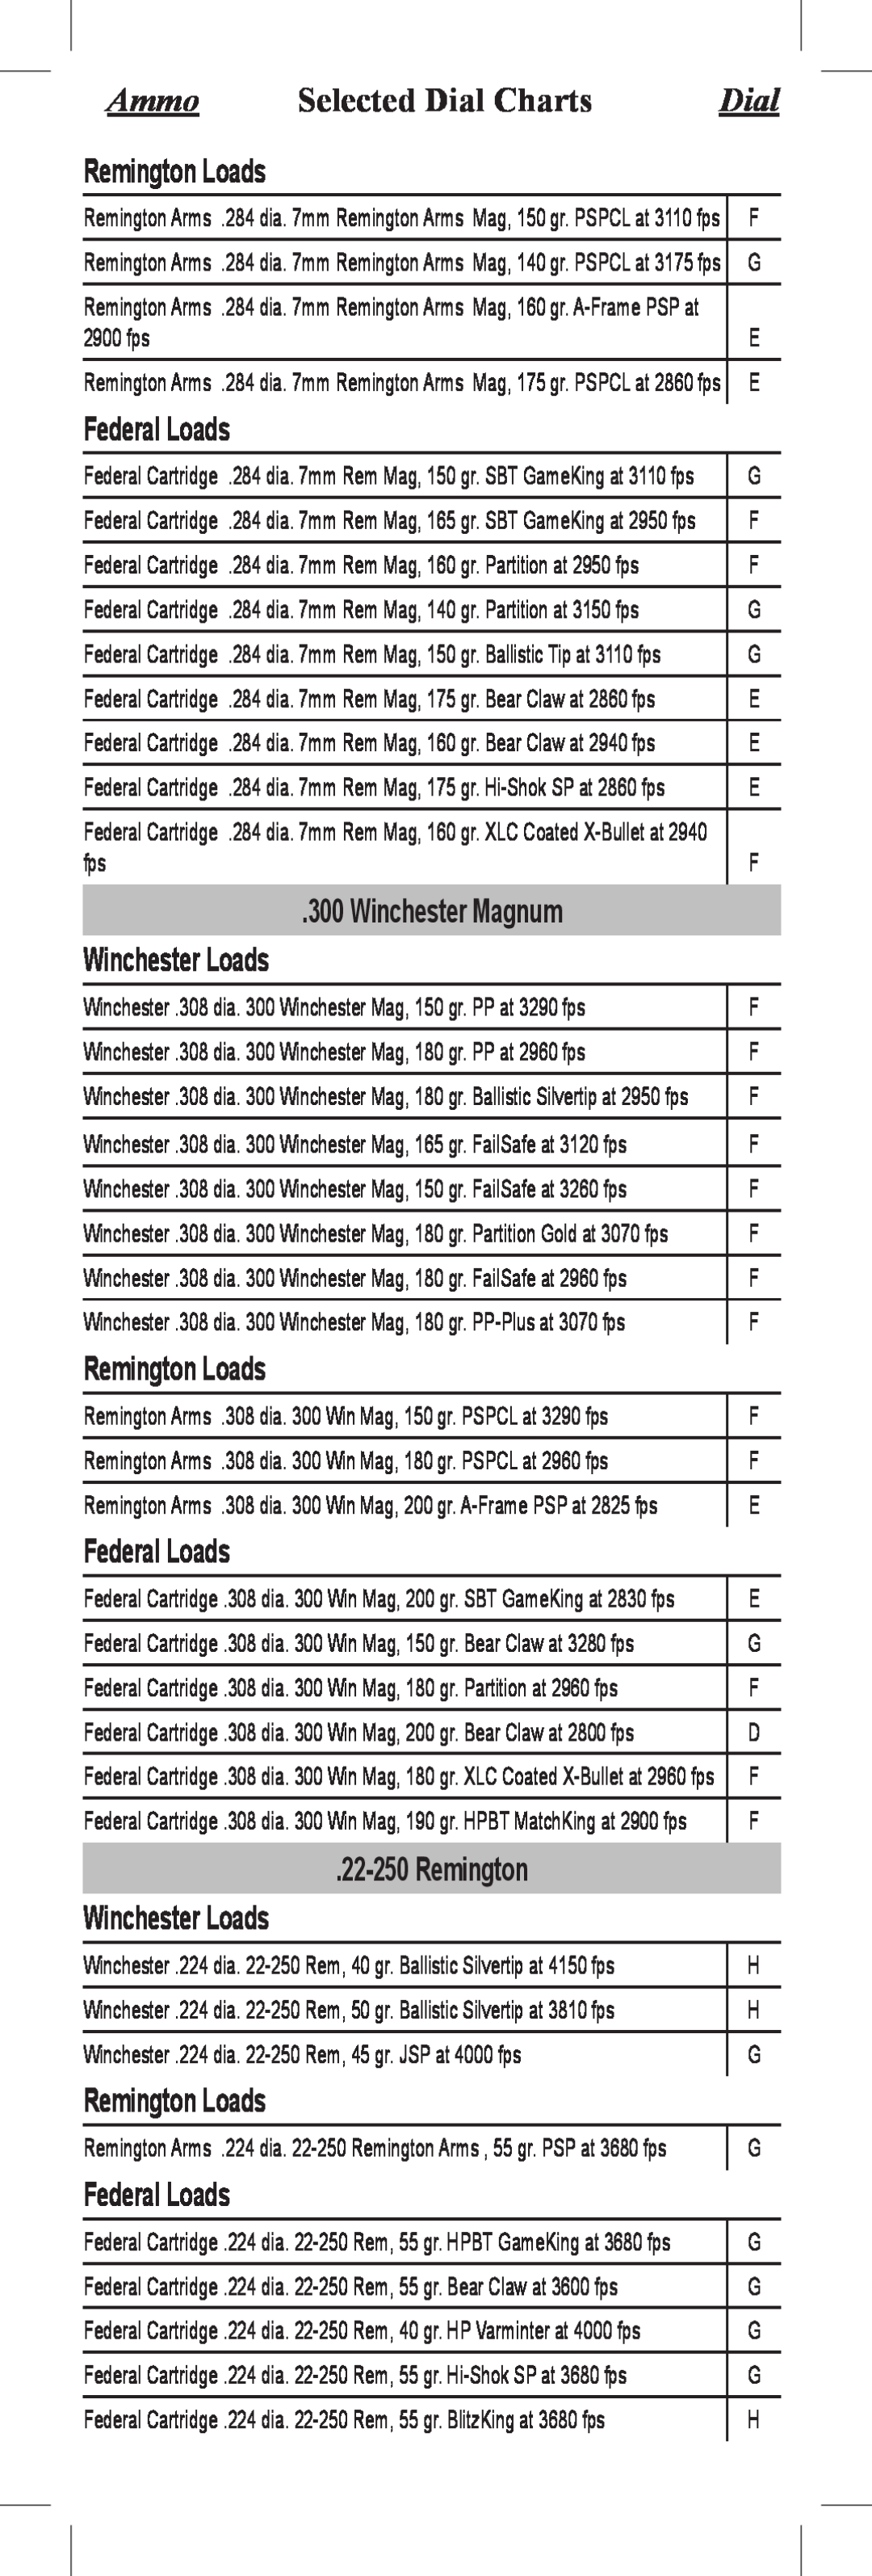 Bushnell 71-3510, 71-3946 Ammo, Selected Dial Charts, Remington Loads, Federal Loads, Winchester Magnum, Winchester Loads 